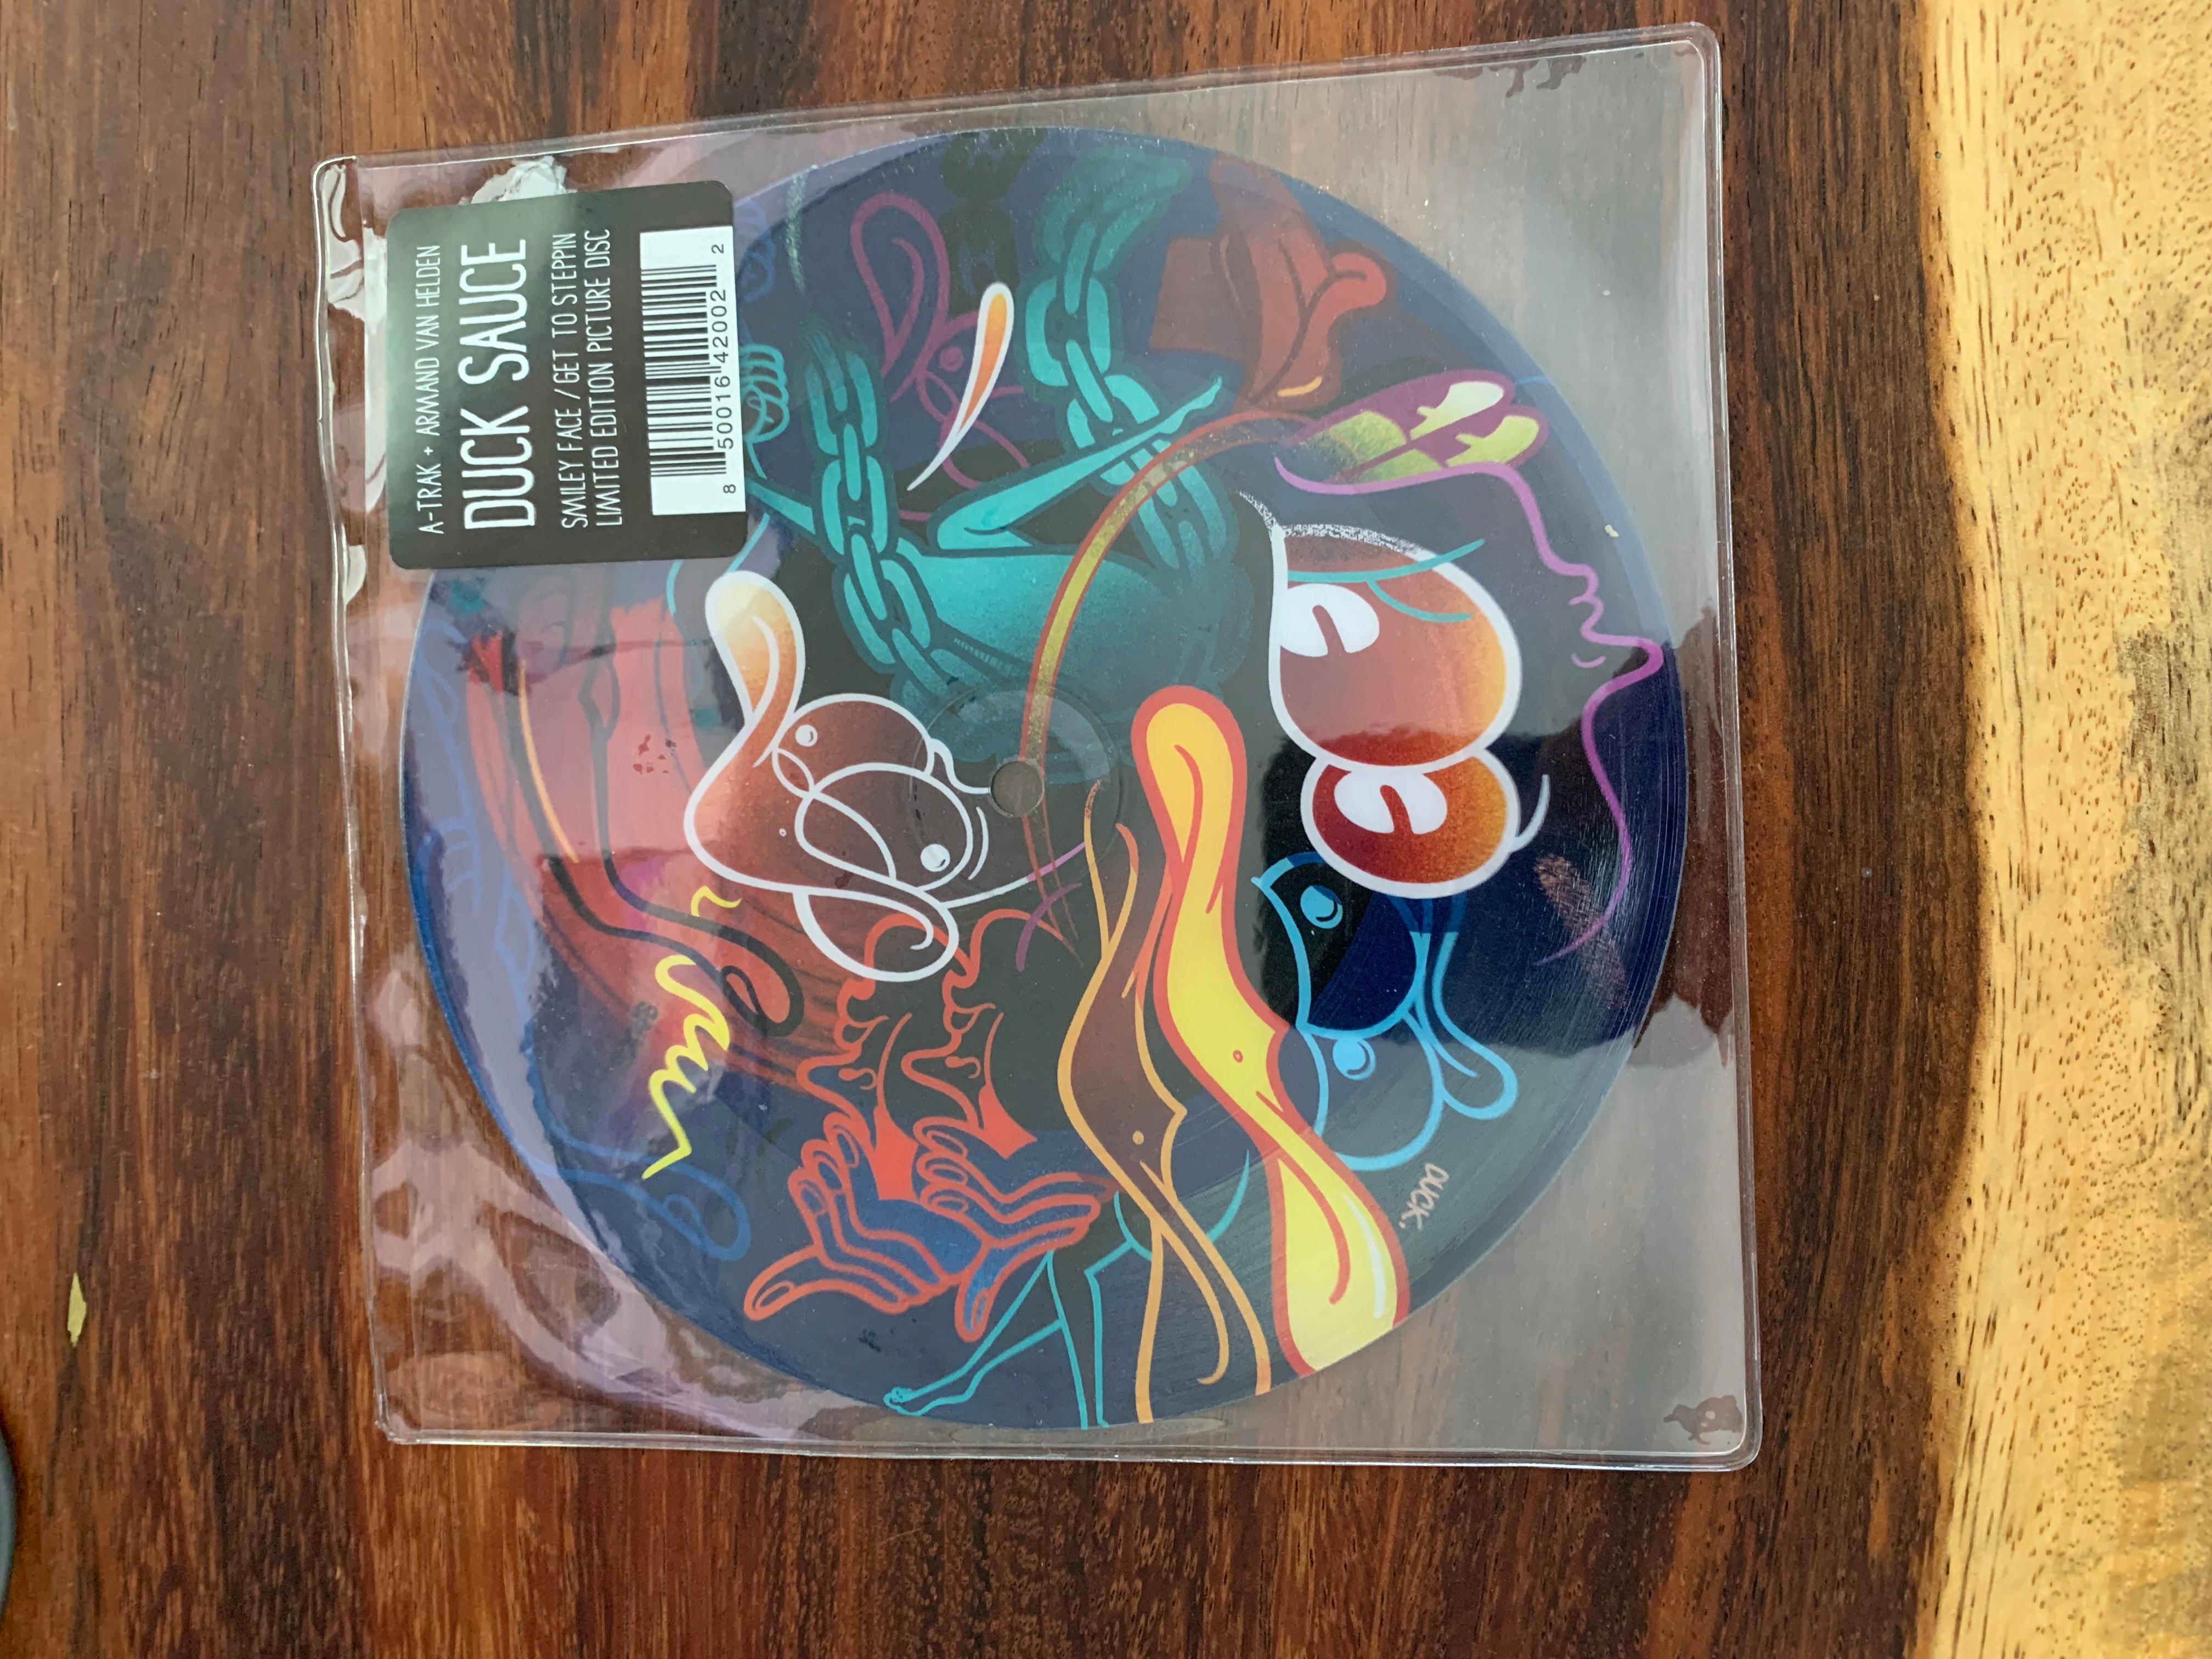 Duck Sauce – Captain Duck / I Don't Mind Limited Edition Vinyl by POSE 7